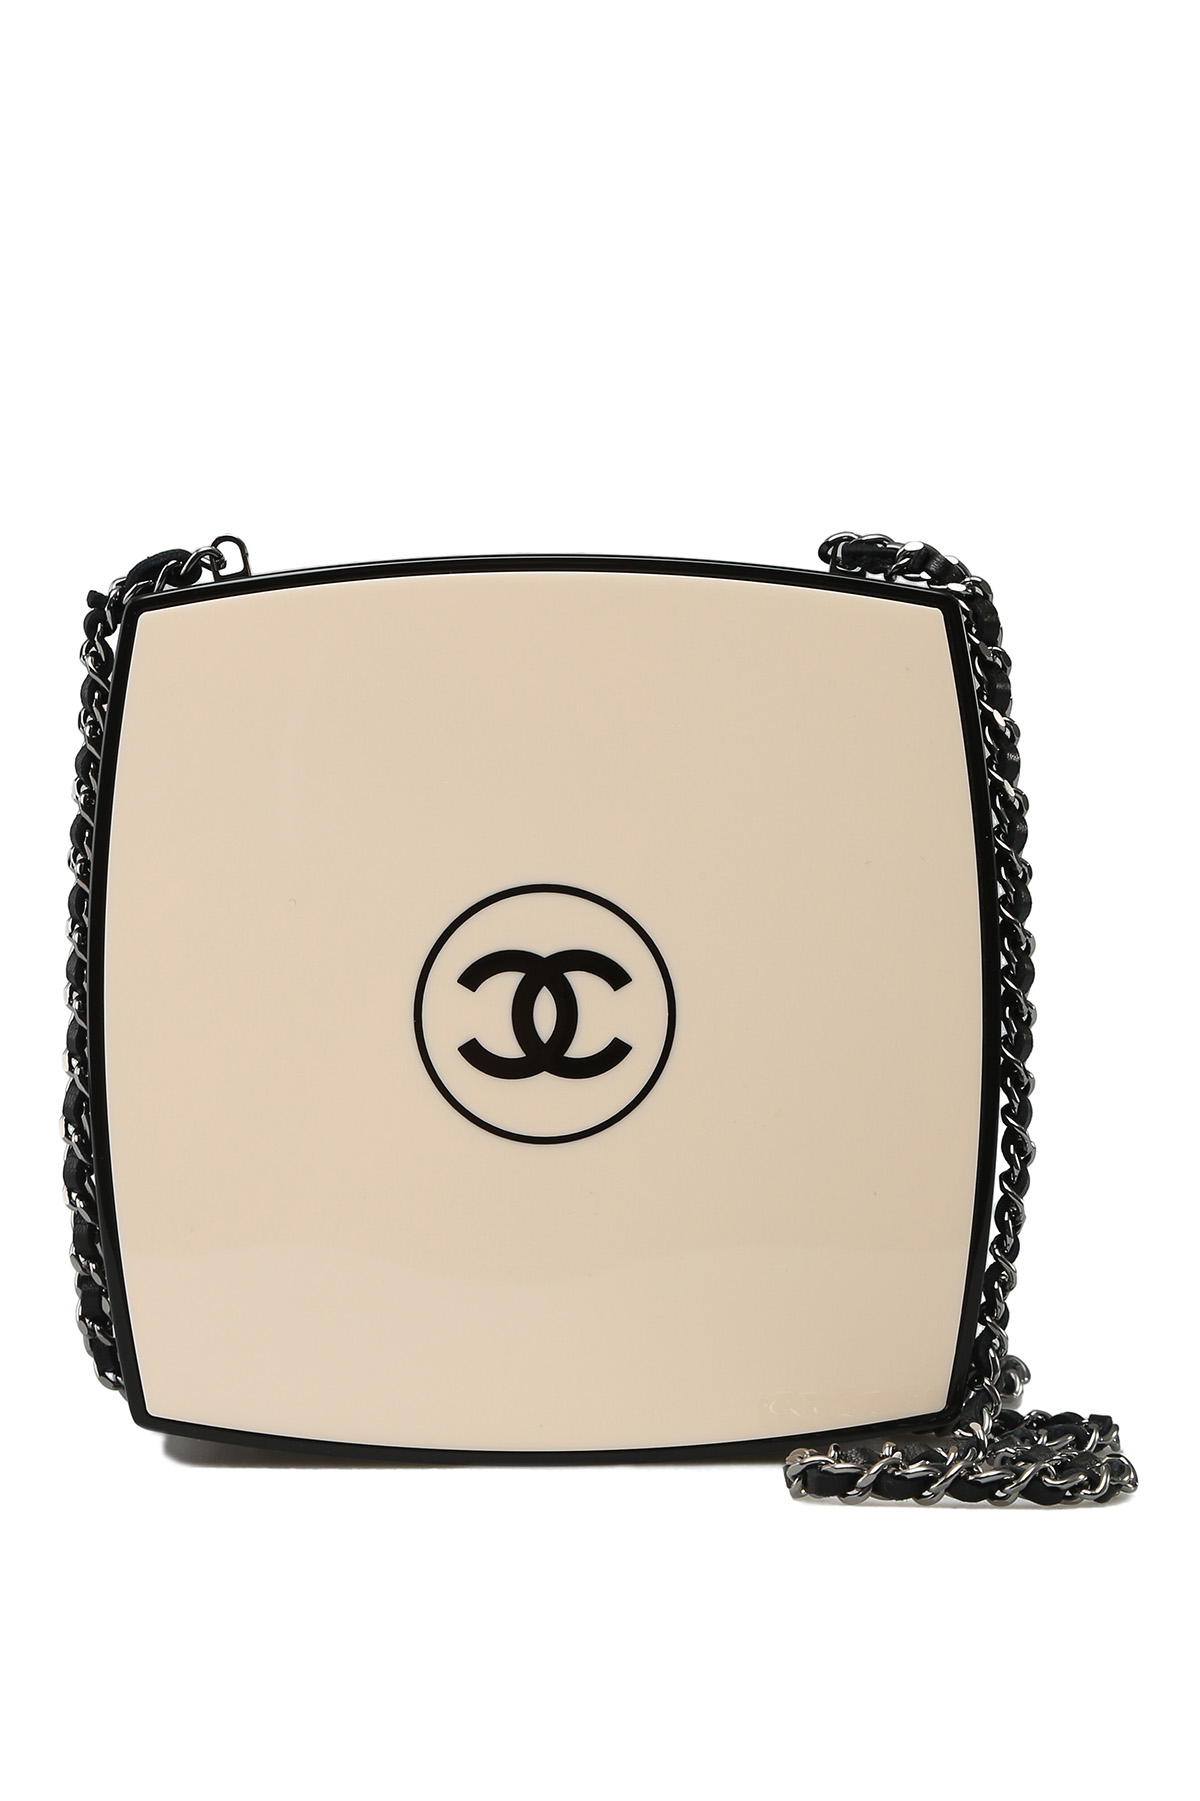 Chanels Compact Powder Case Clutch With Chain  BagAddicts Anonymous